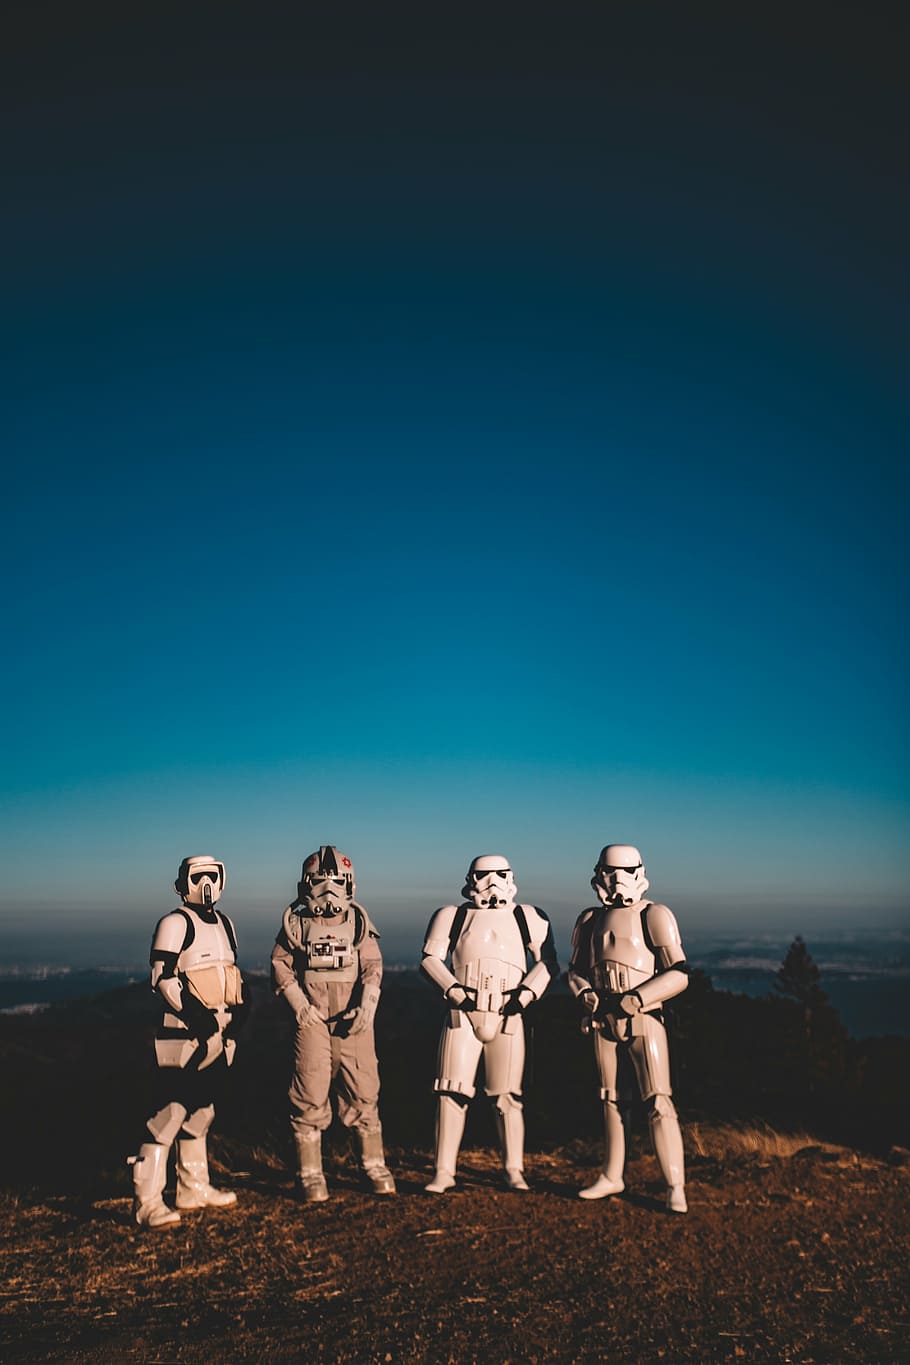 four, star wars stormtroopers cosplay, standing, field, man, wearing, white, star, wars, themed